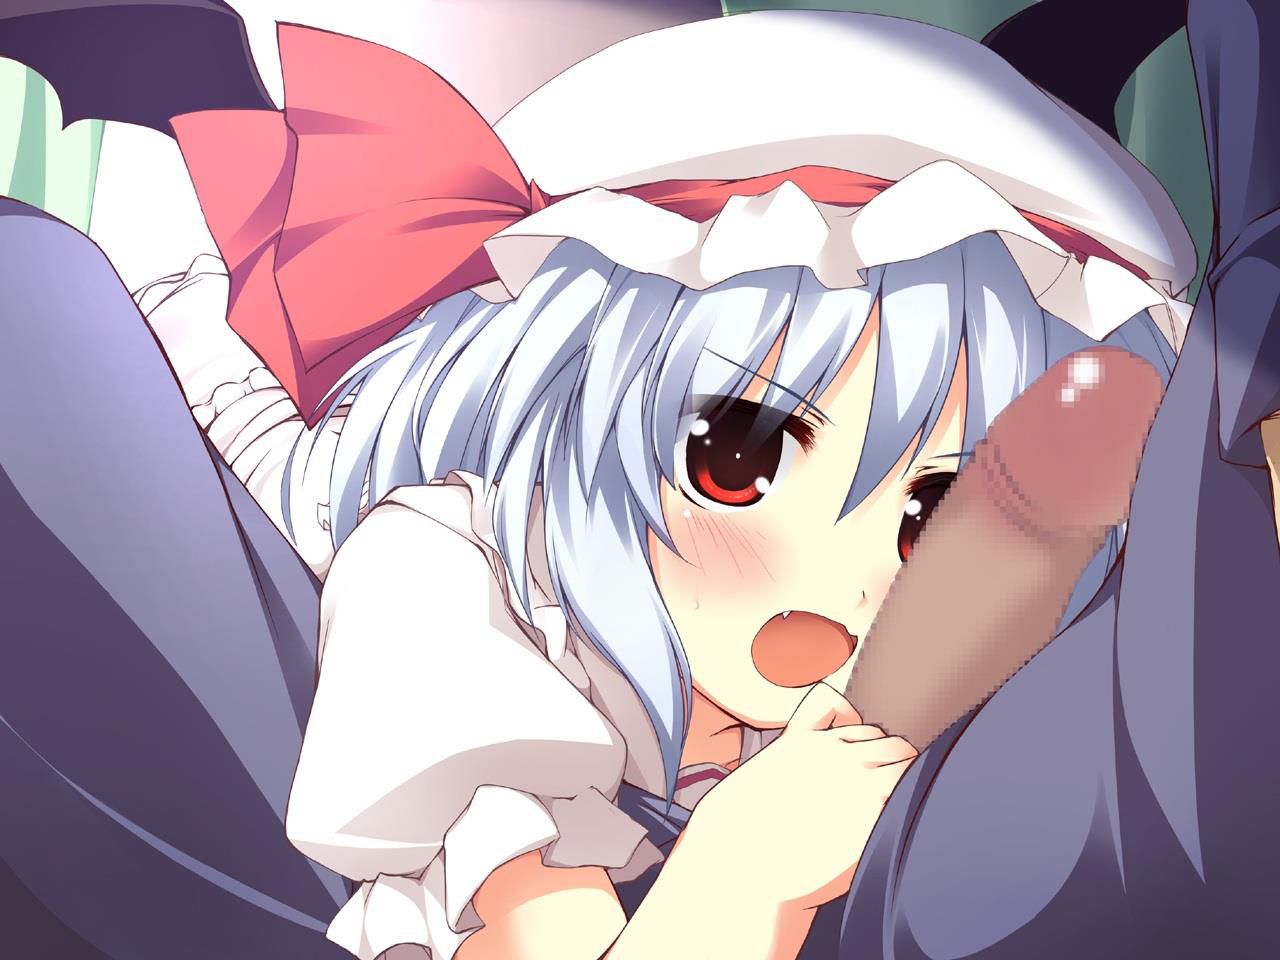 Charm of the touhou Project examined in erotic pictures 15